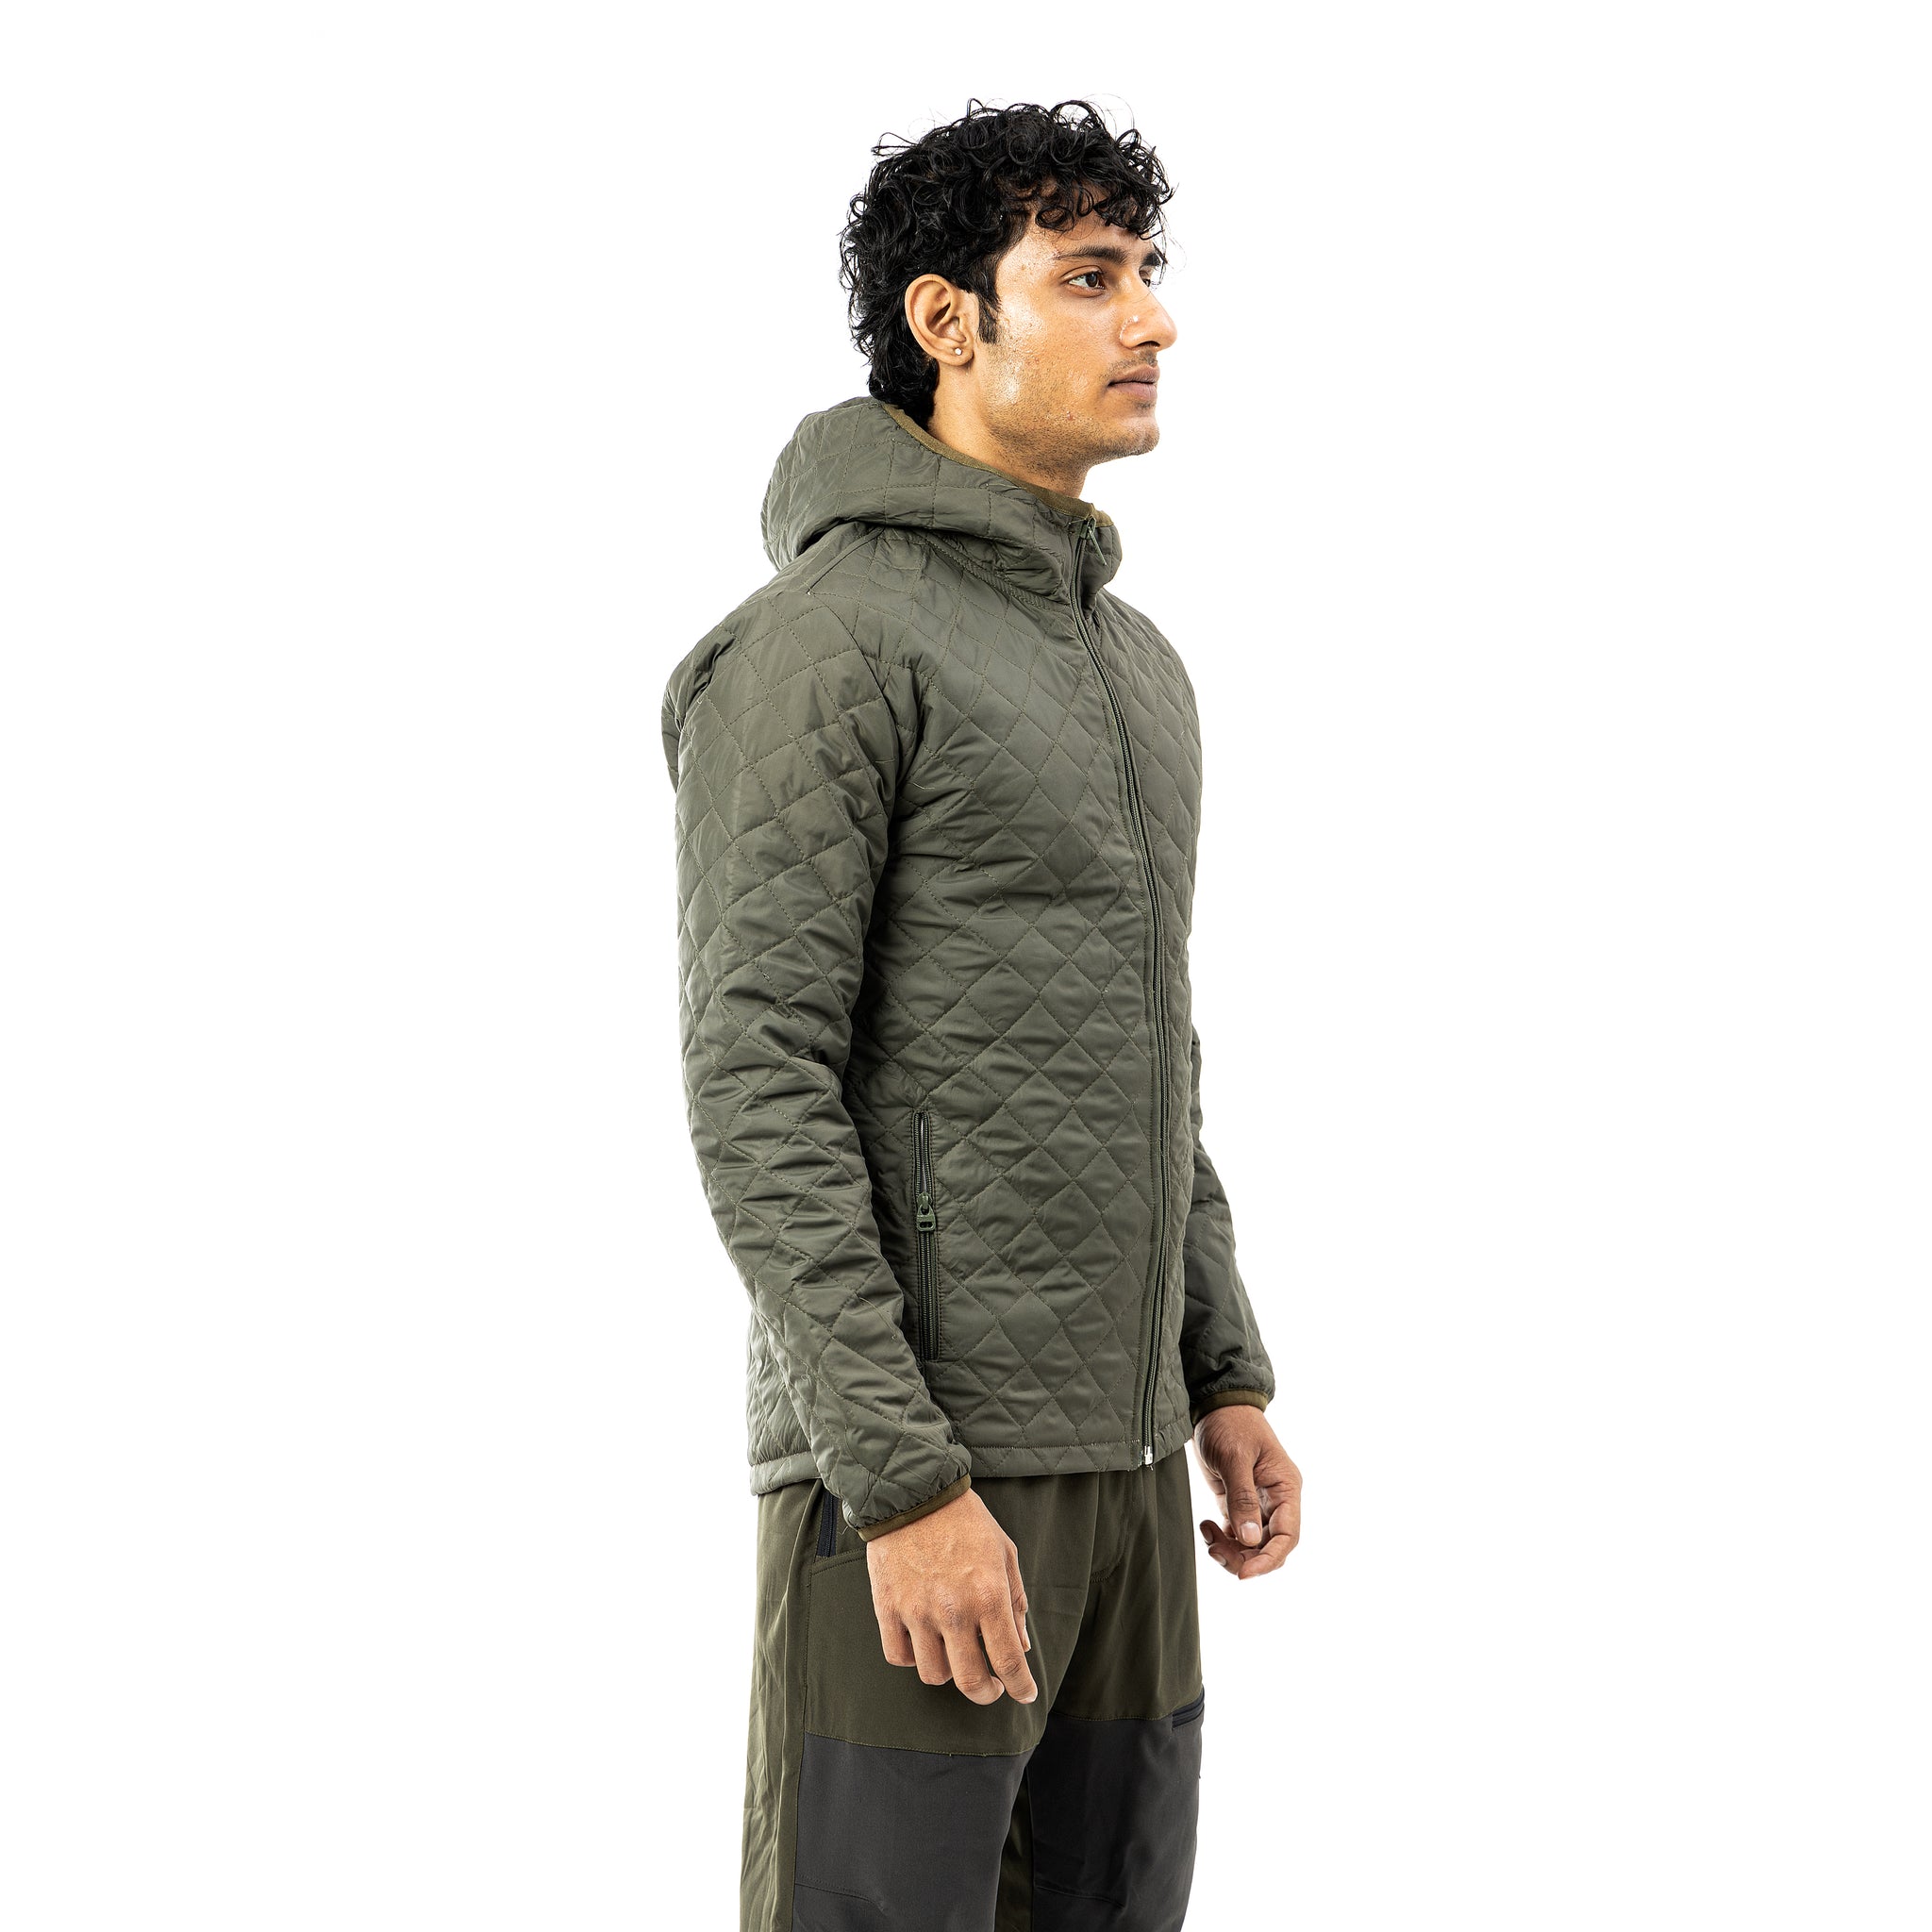 Tripole Quilted Winter Jacket for Daily Use, Hiking and Travelling